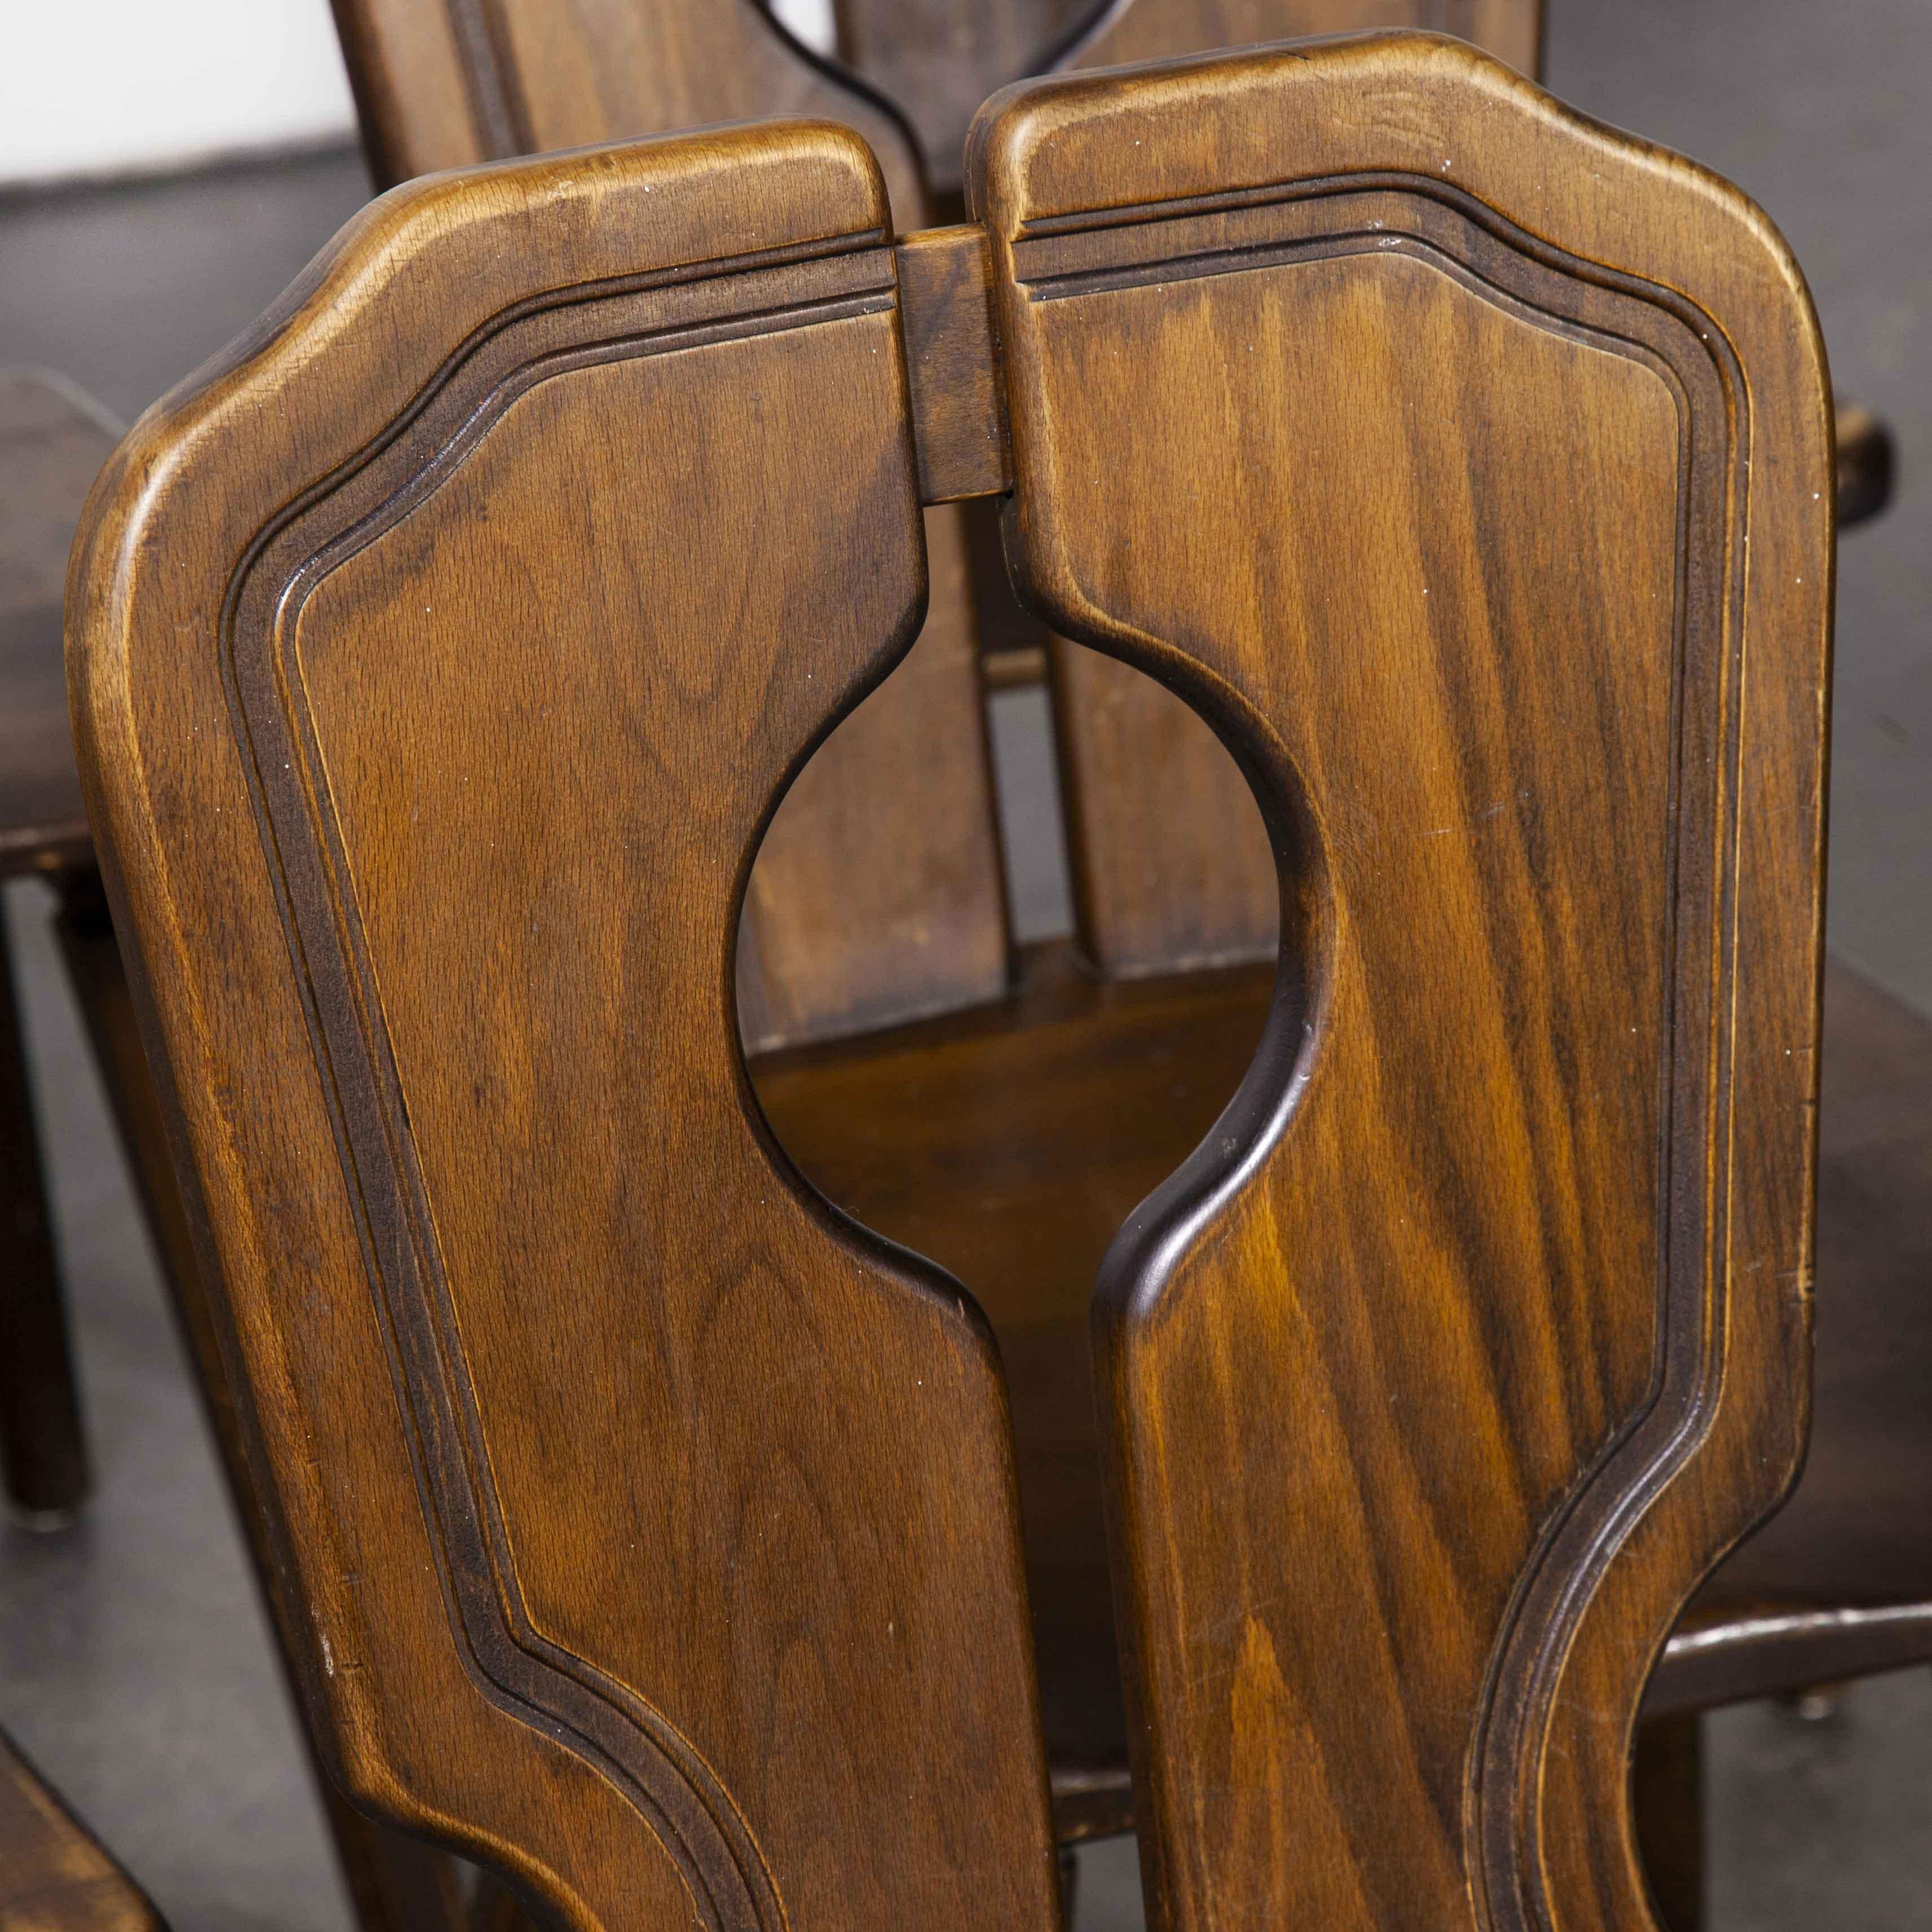 1950’s Alsace regional open back dining chair – set of six. This alpine influenced design is well known in the Alsace region. Handmade in solid beech they have a distinct and appealing mid century design. These chairs were made locally in small